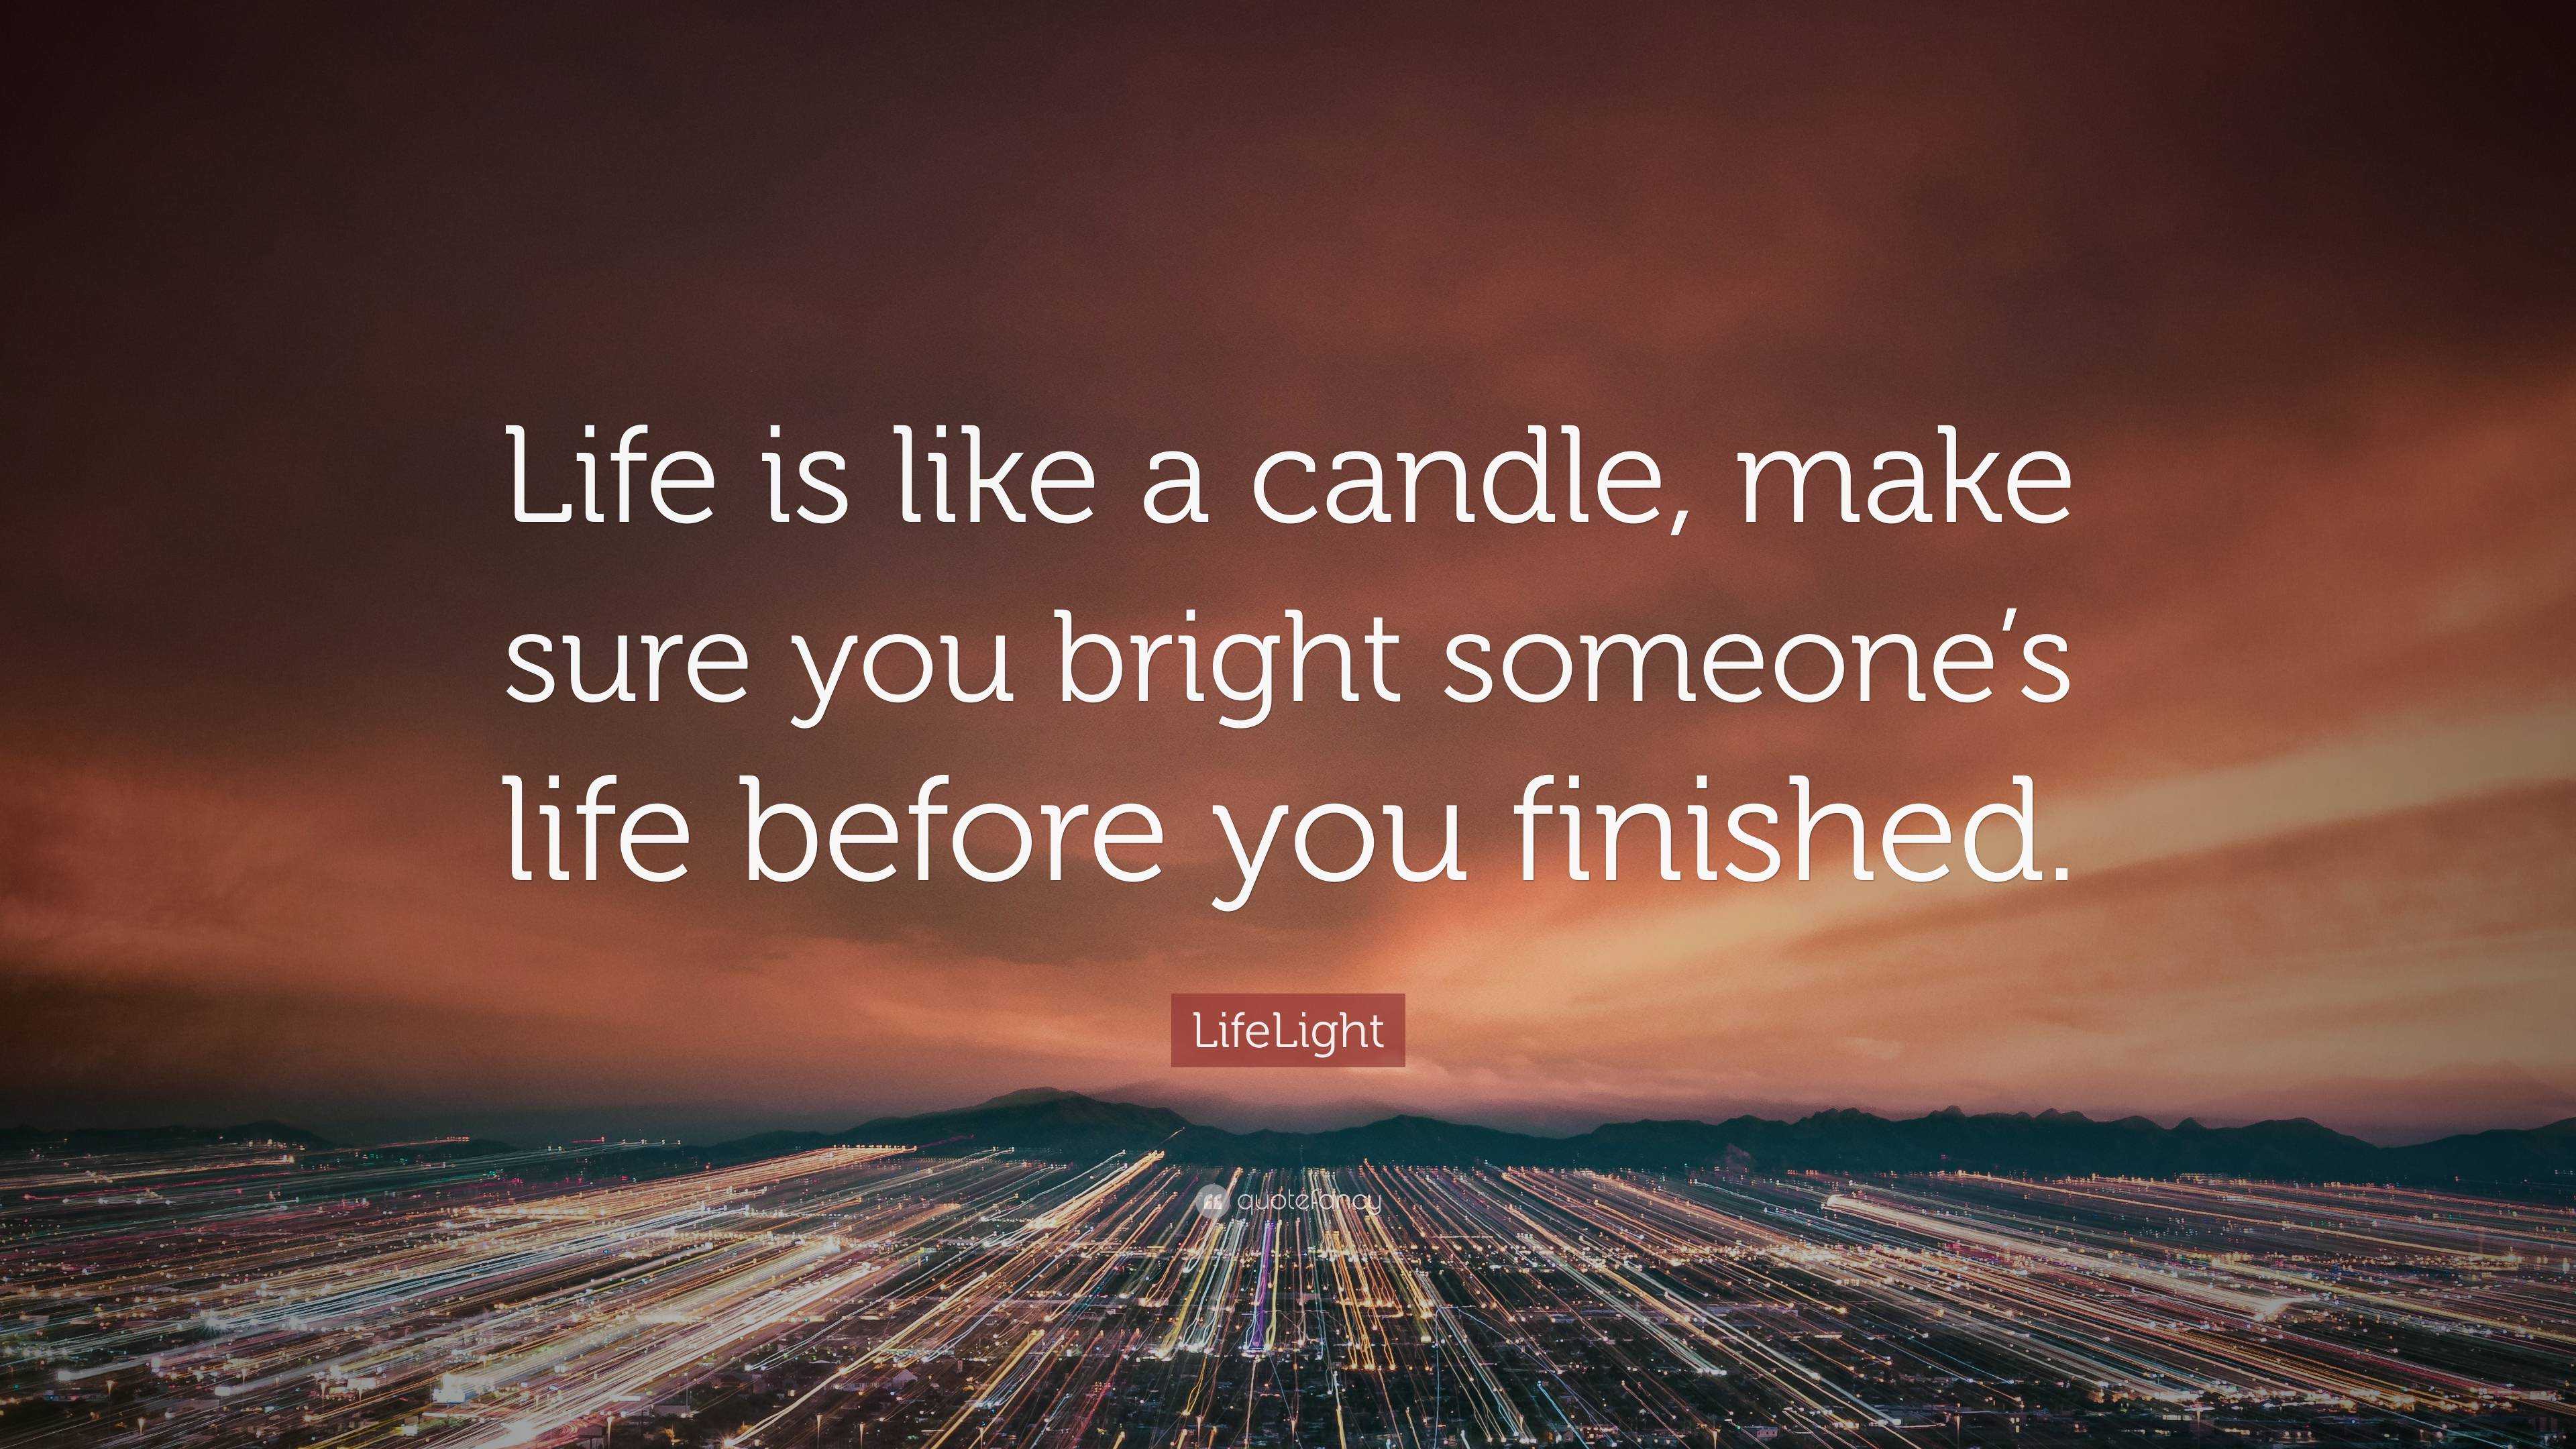 Lifelight Quote: “Life Is Like A Candle, Make Sure You Bright Someone's Life Before You Finished.”